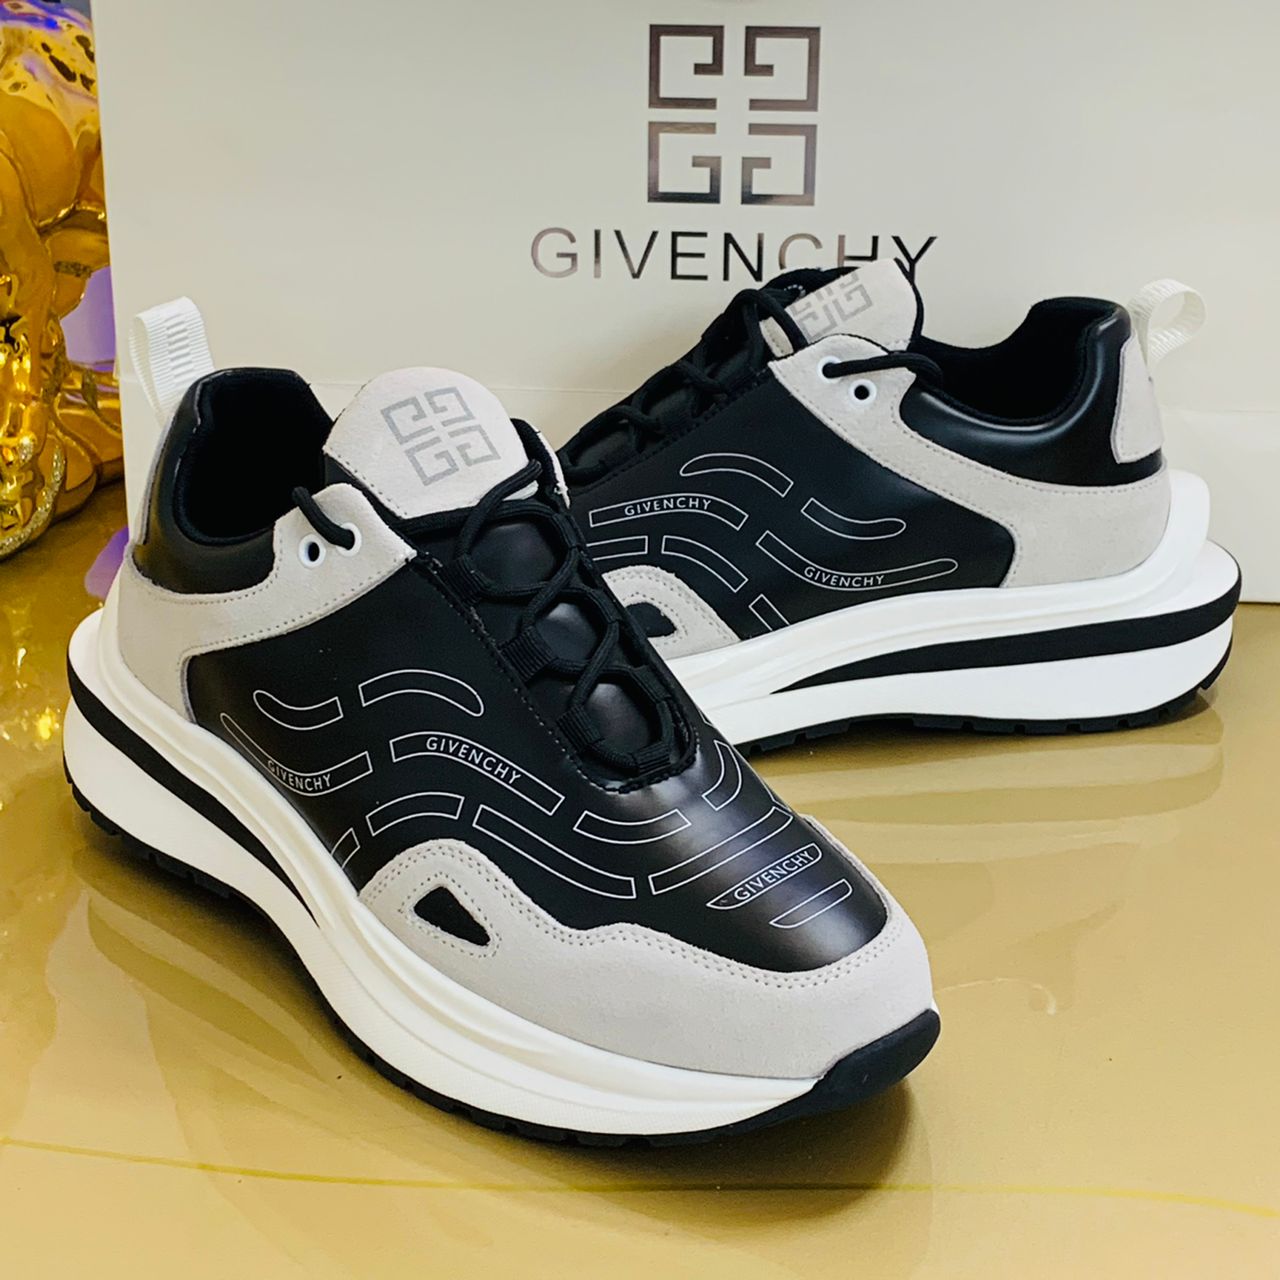 LUXURIOUS CASUAL FASHION LOW-TOP RUNNING SNEAKERS